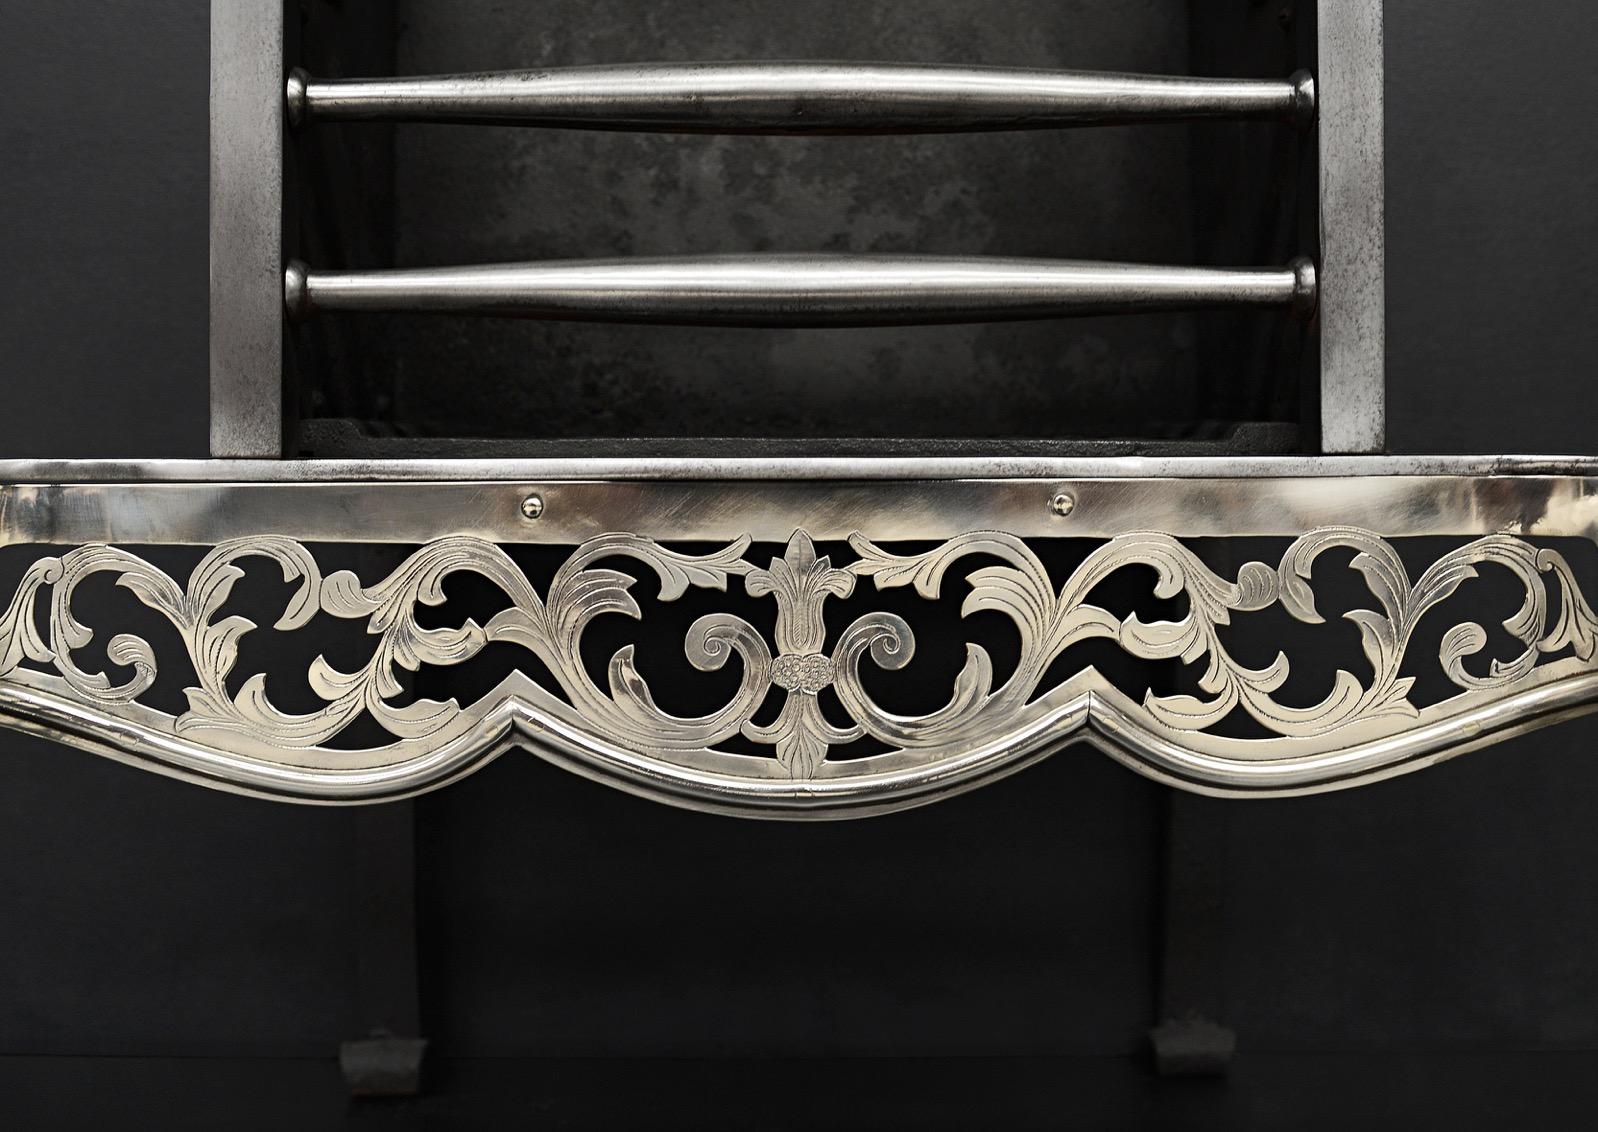 An attractive steel and nickel firegrate, in the mid Georgian style, the pierced and engraved fretwork of floral pattern, tapering column legs with bulbous urn finials. The fretwork, legs, and finials in nickel with polished steel front bars and